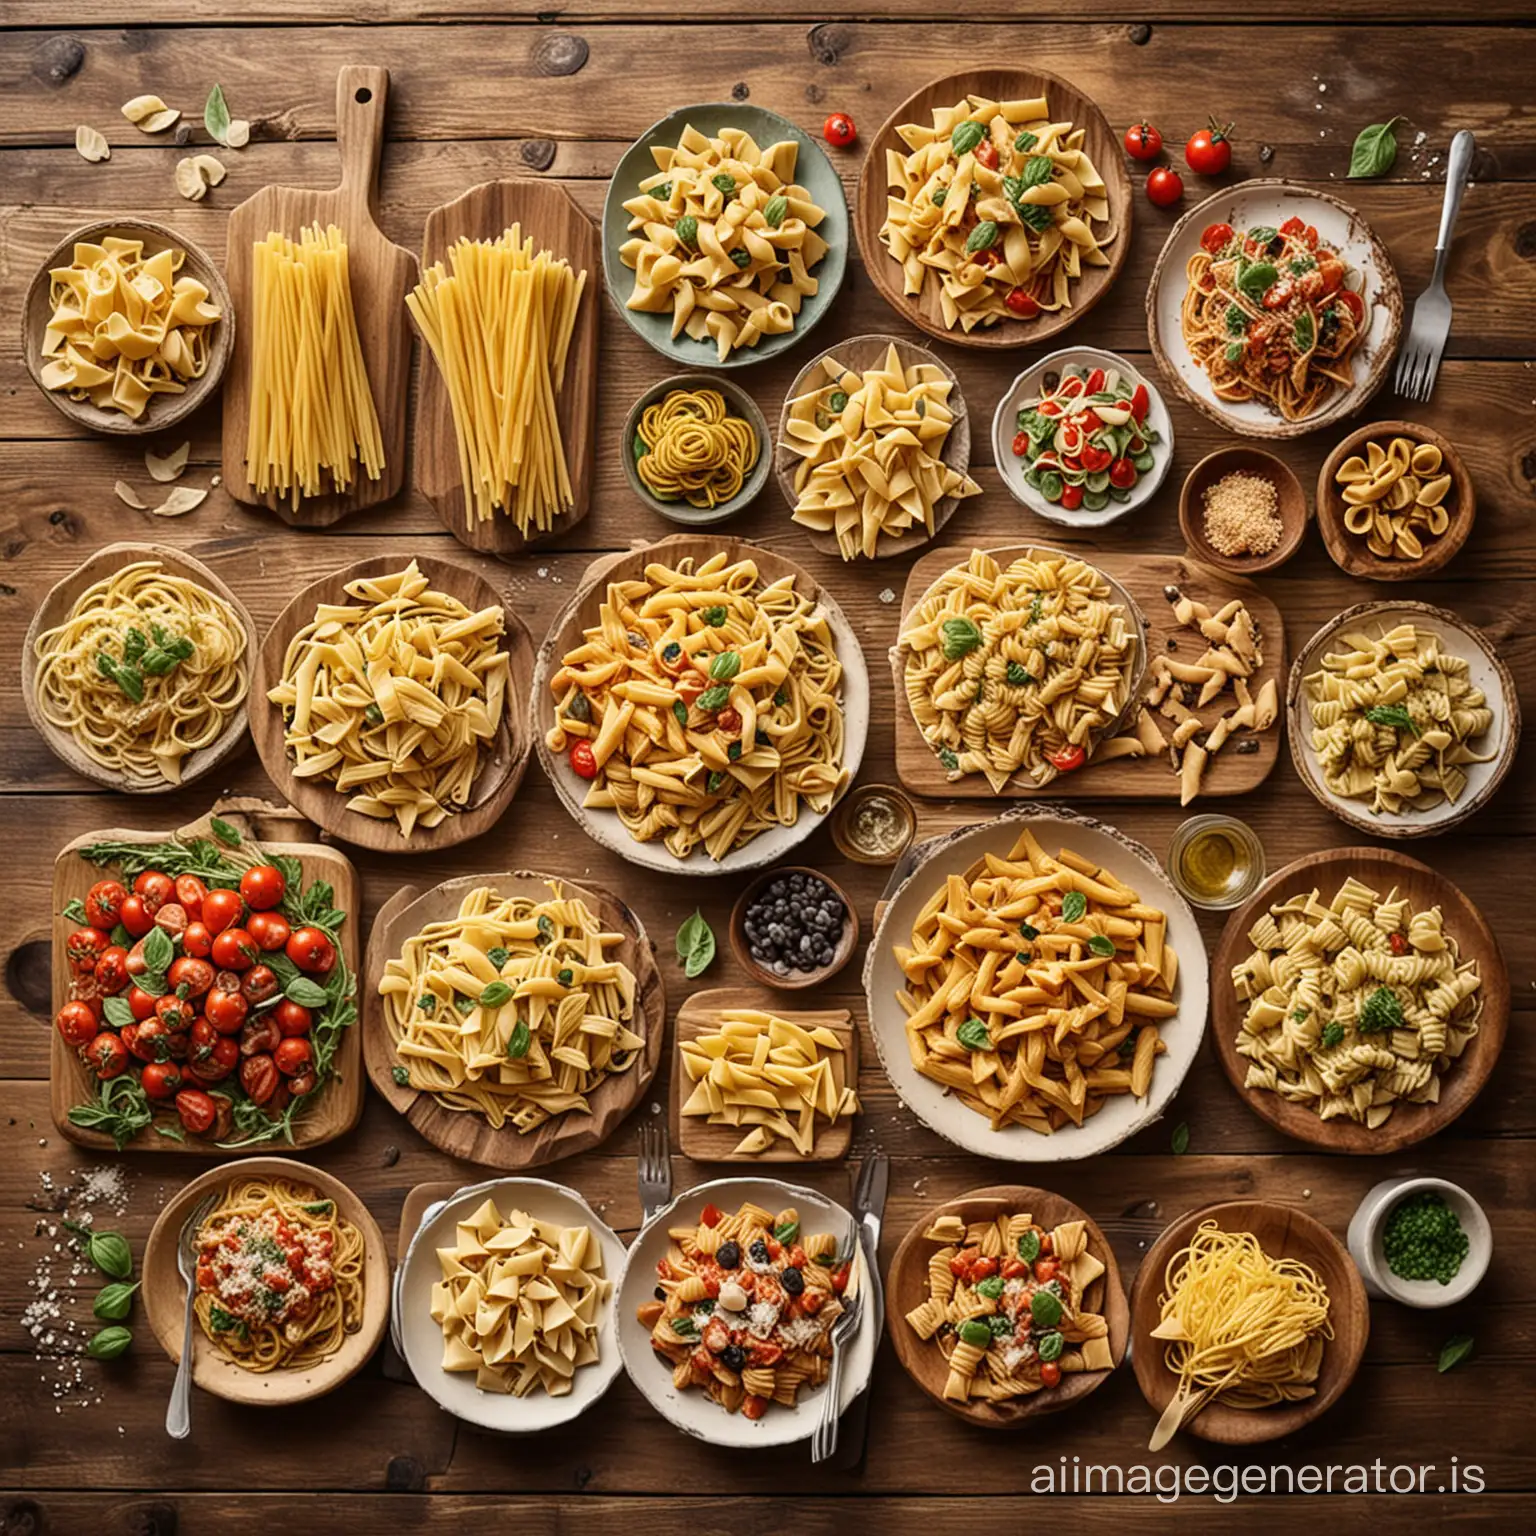 show 10 types of pasta in the woody table with cool and cozy atmosphere